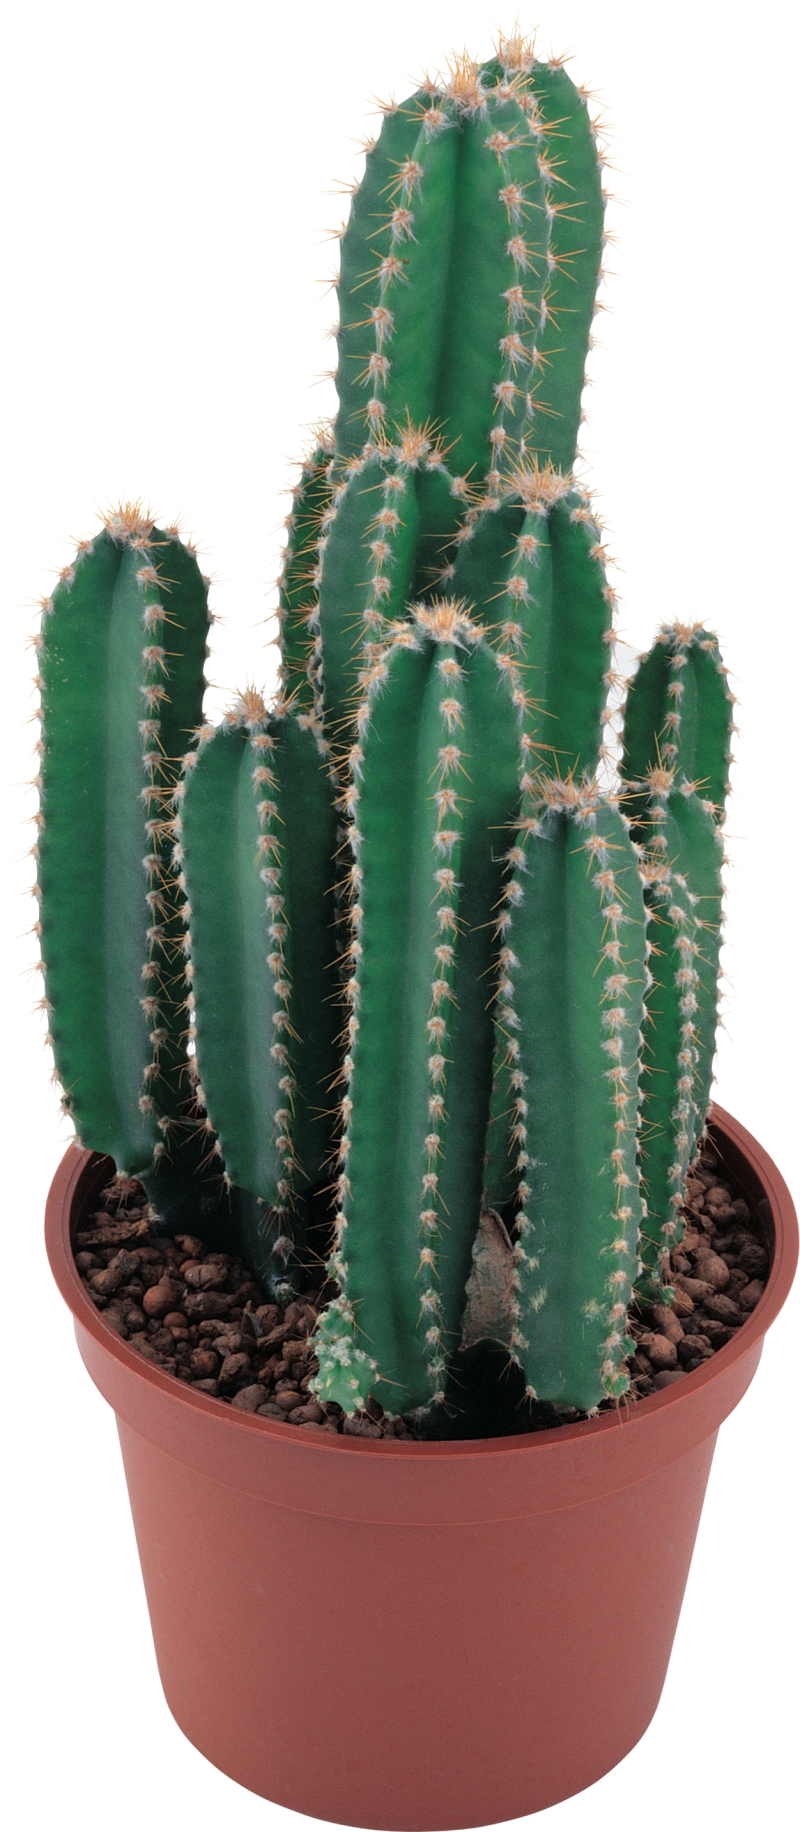 Classic Cactus PNG Image - PurePNG | Free transparent CC0 PNG Image Library